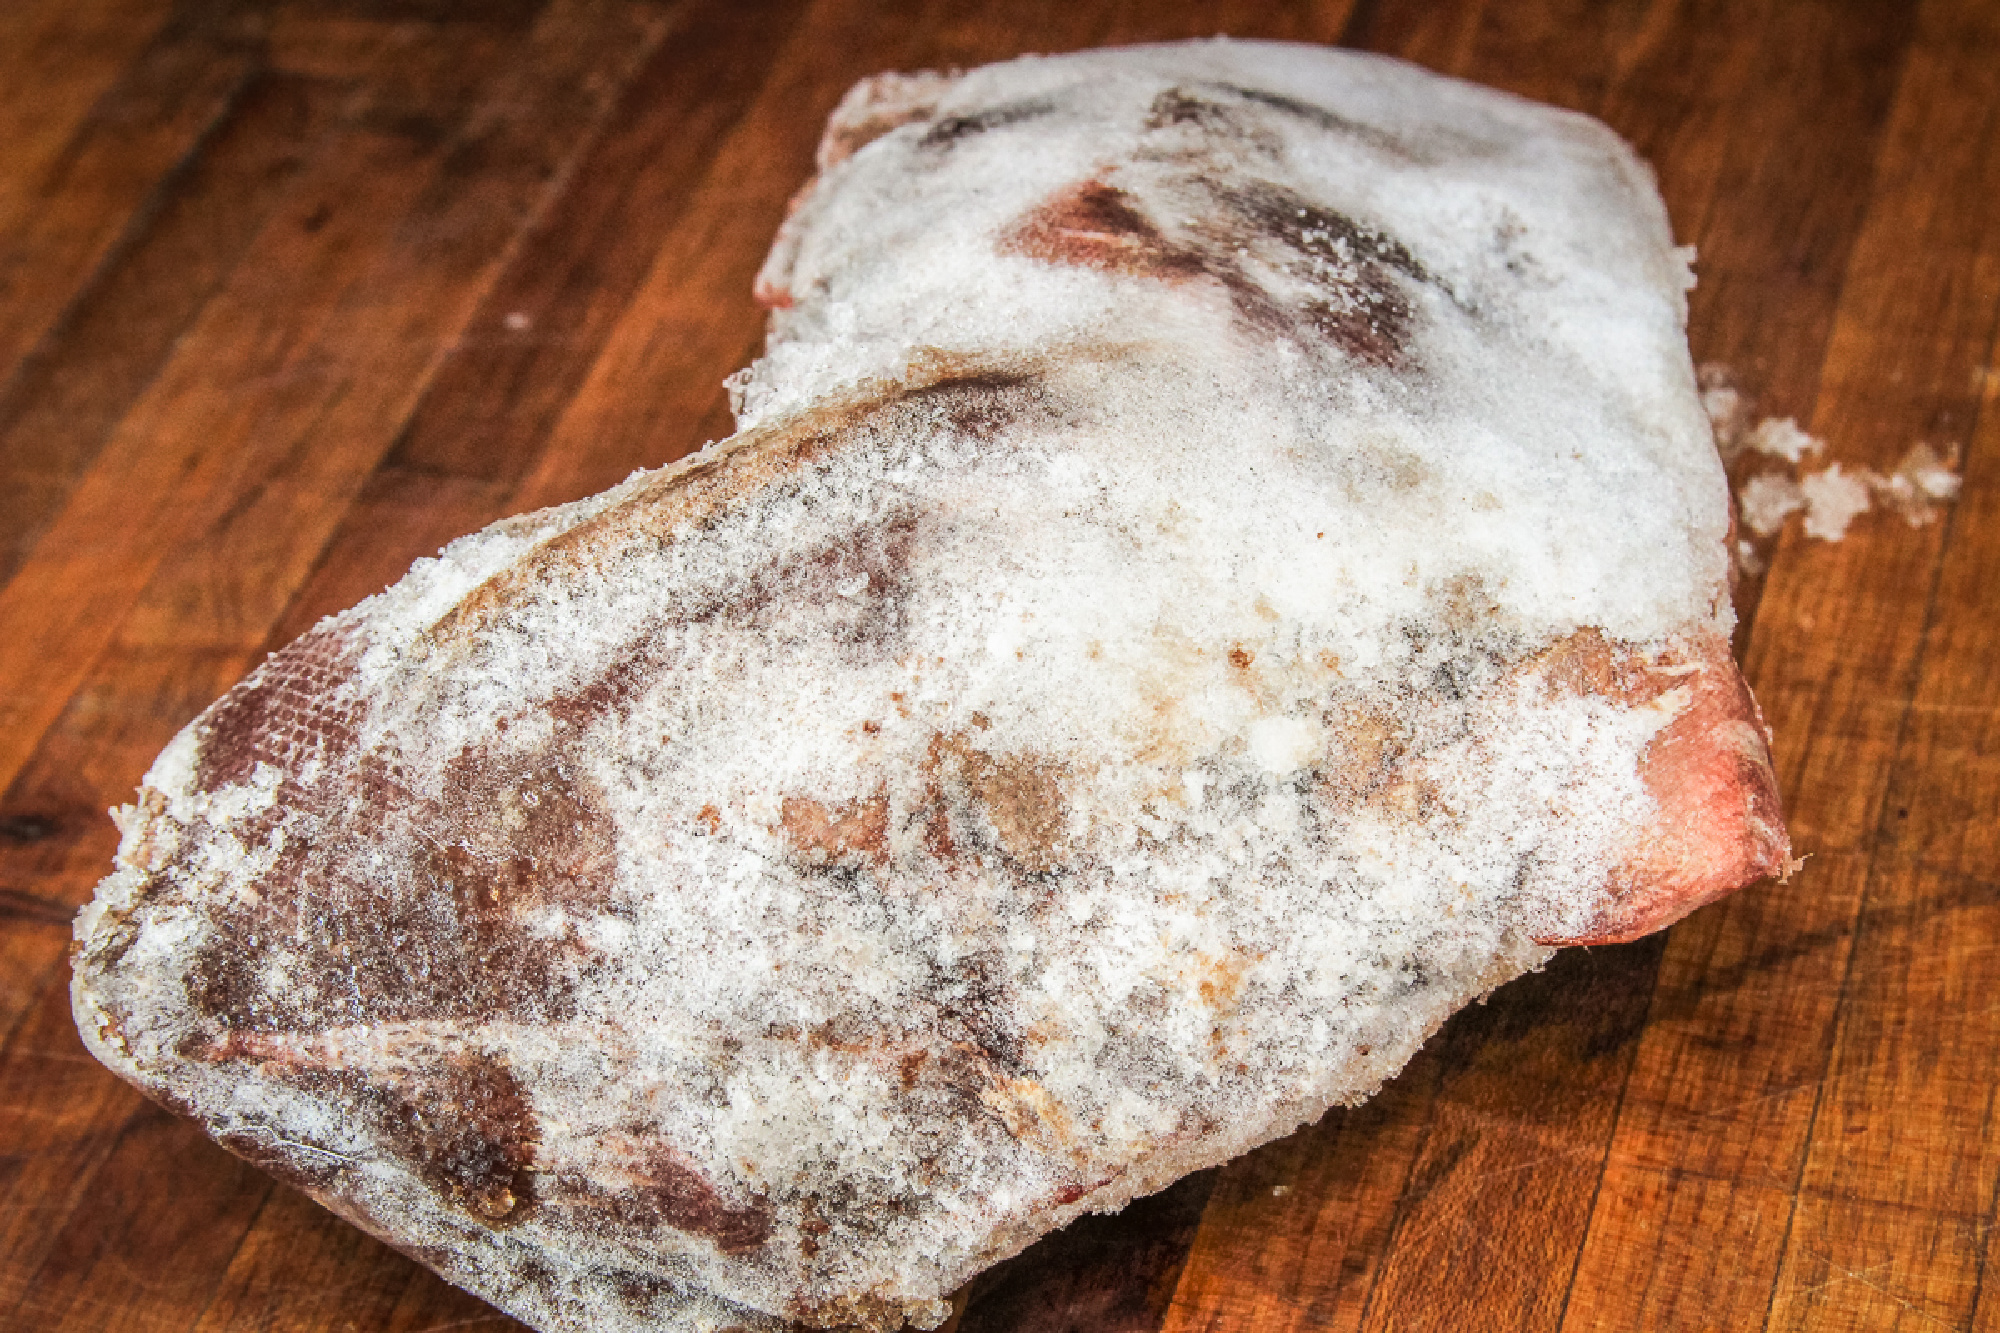 A piece of meat is covered in serious freezer burn.